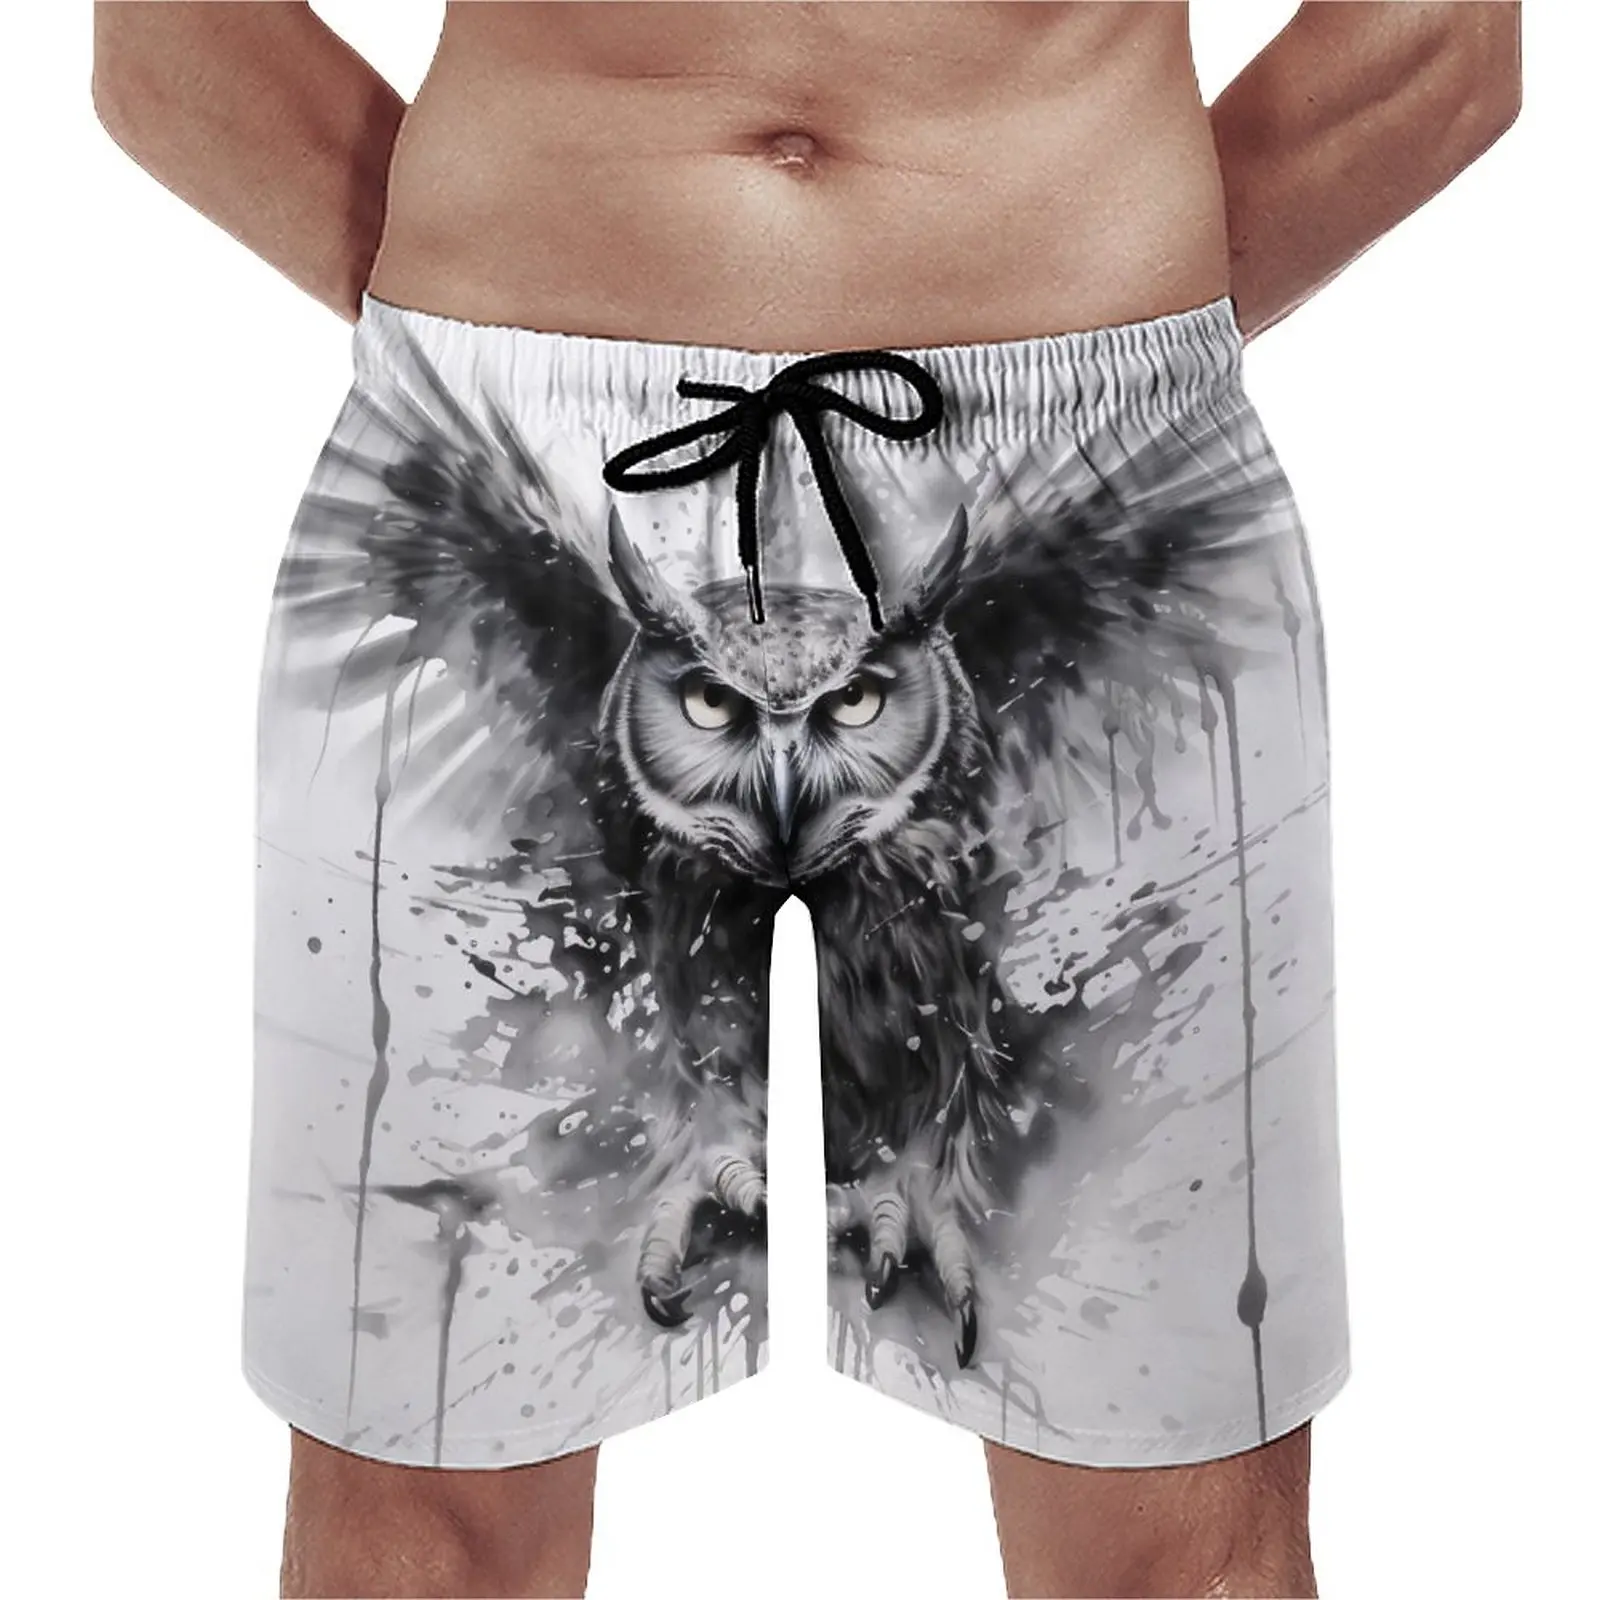 

Gym Shorts Owl Hawaii Swim Trunks Ink Drawing Hyper Artistic Males Quick Dry Sports Hot Sale Large Size Beach Short Pants